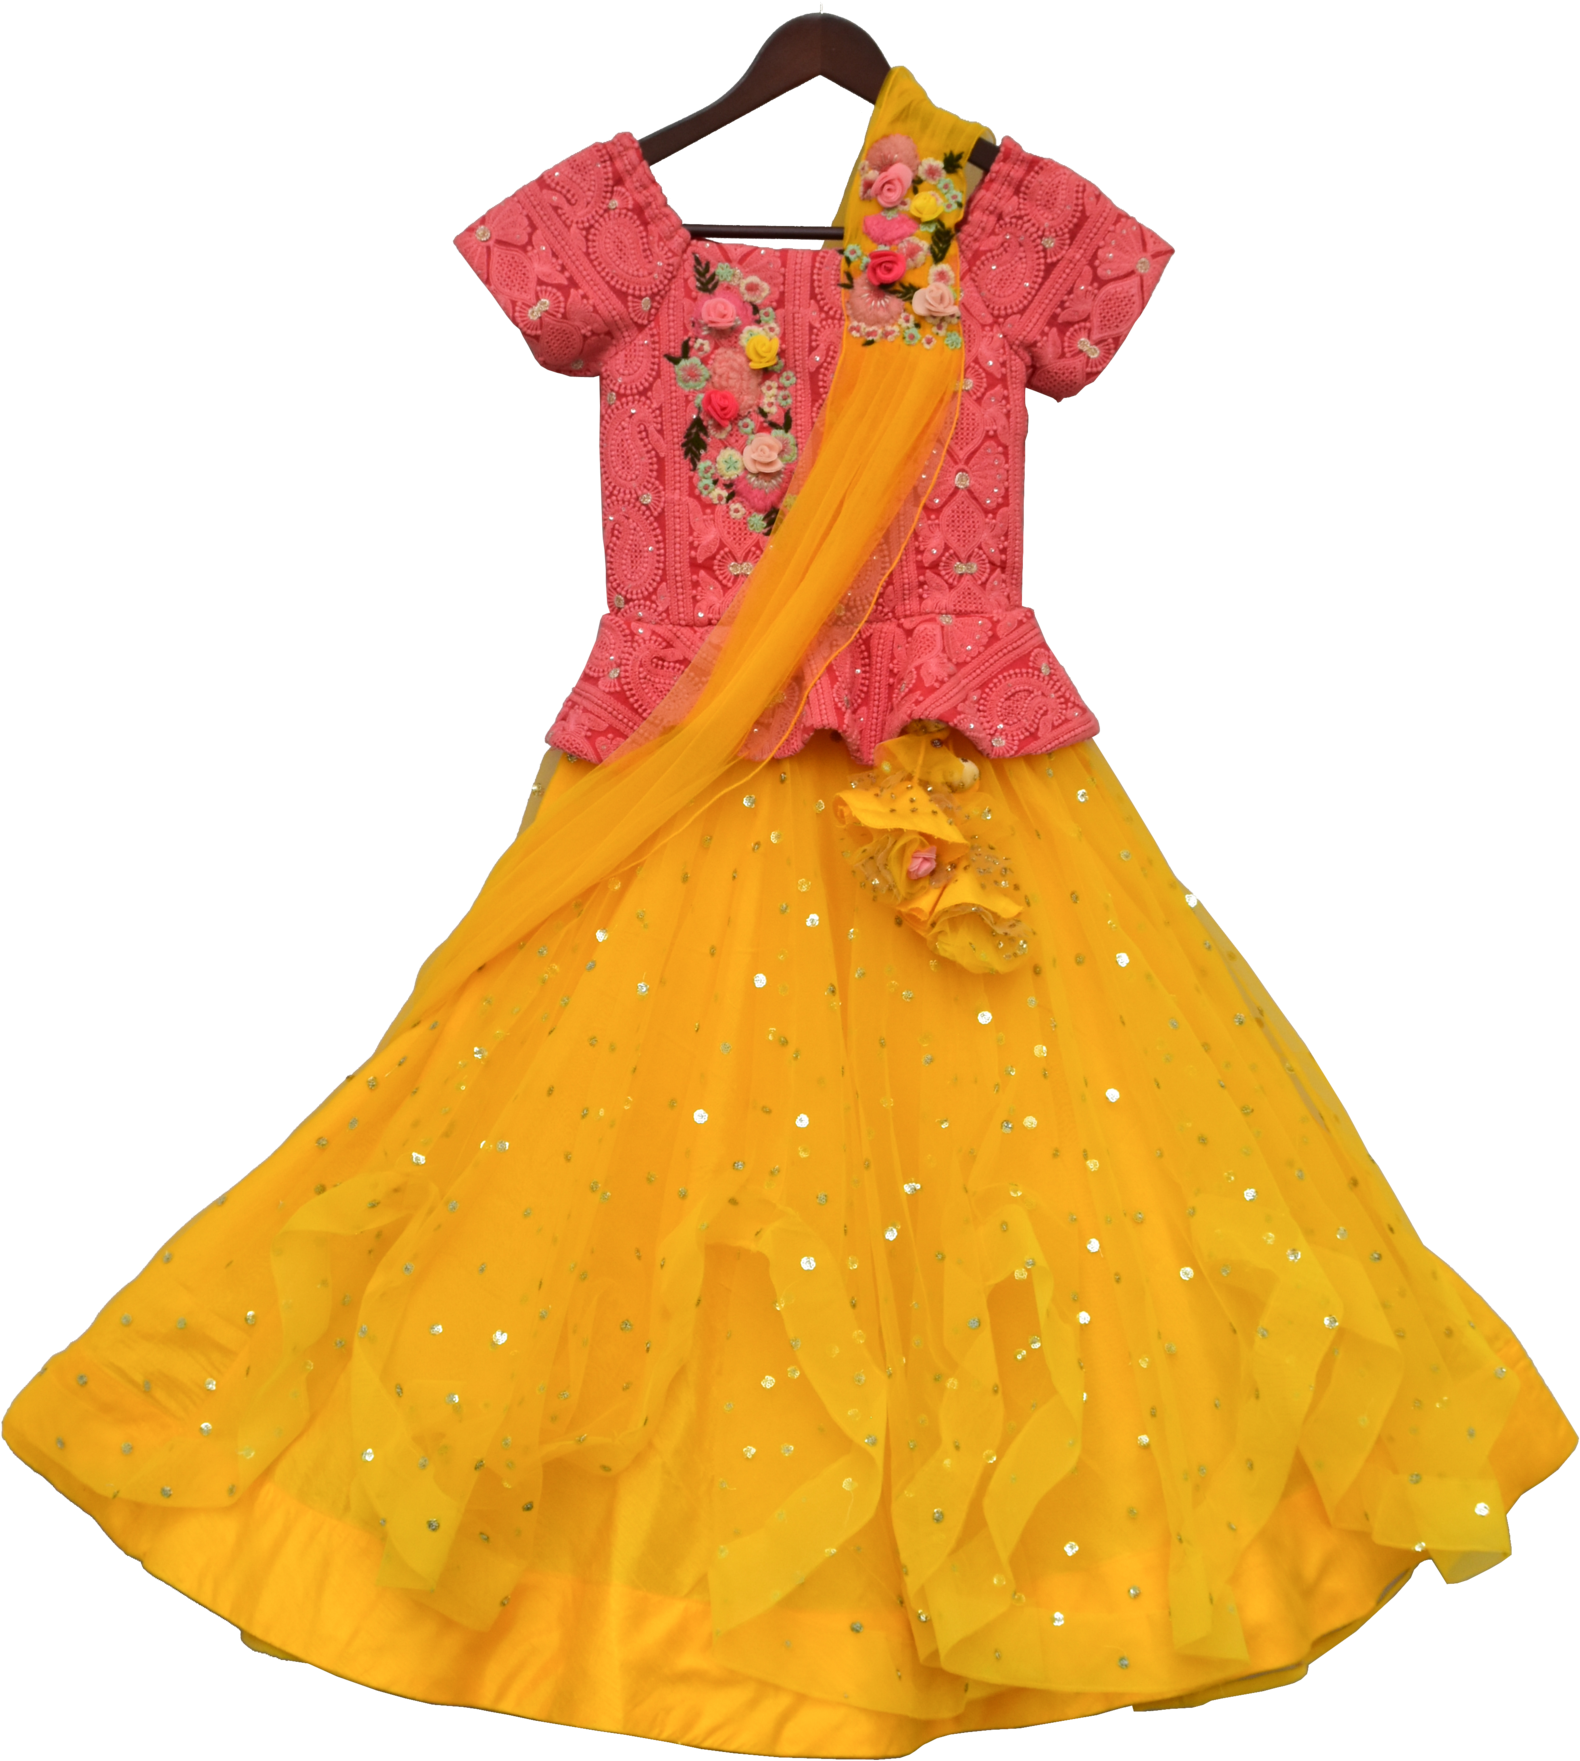 Load Image Into Gallery Viewer, Girls Peach Embroidery - Day Dress (1746x2048), Png Download